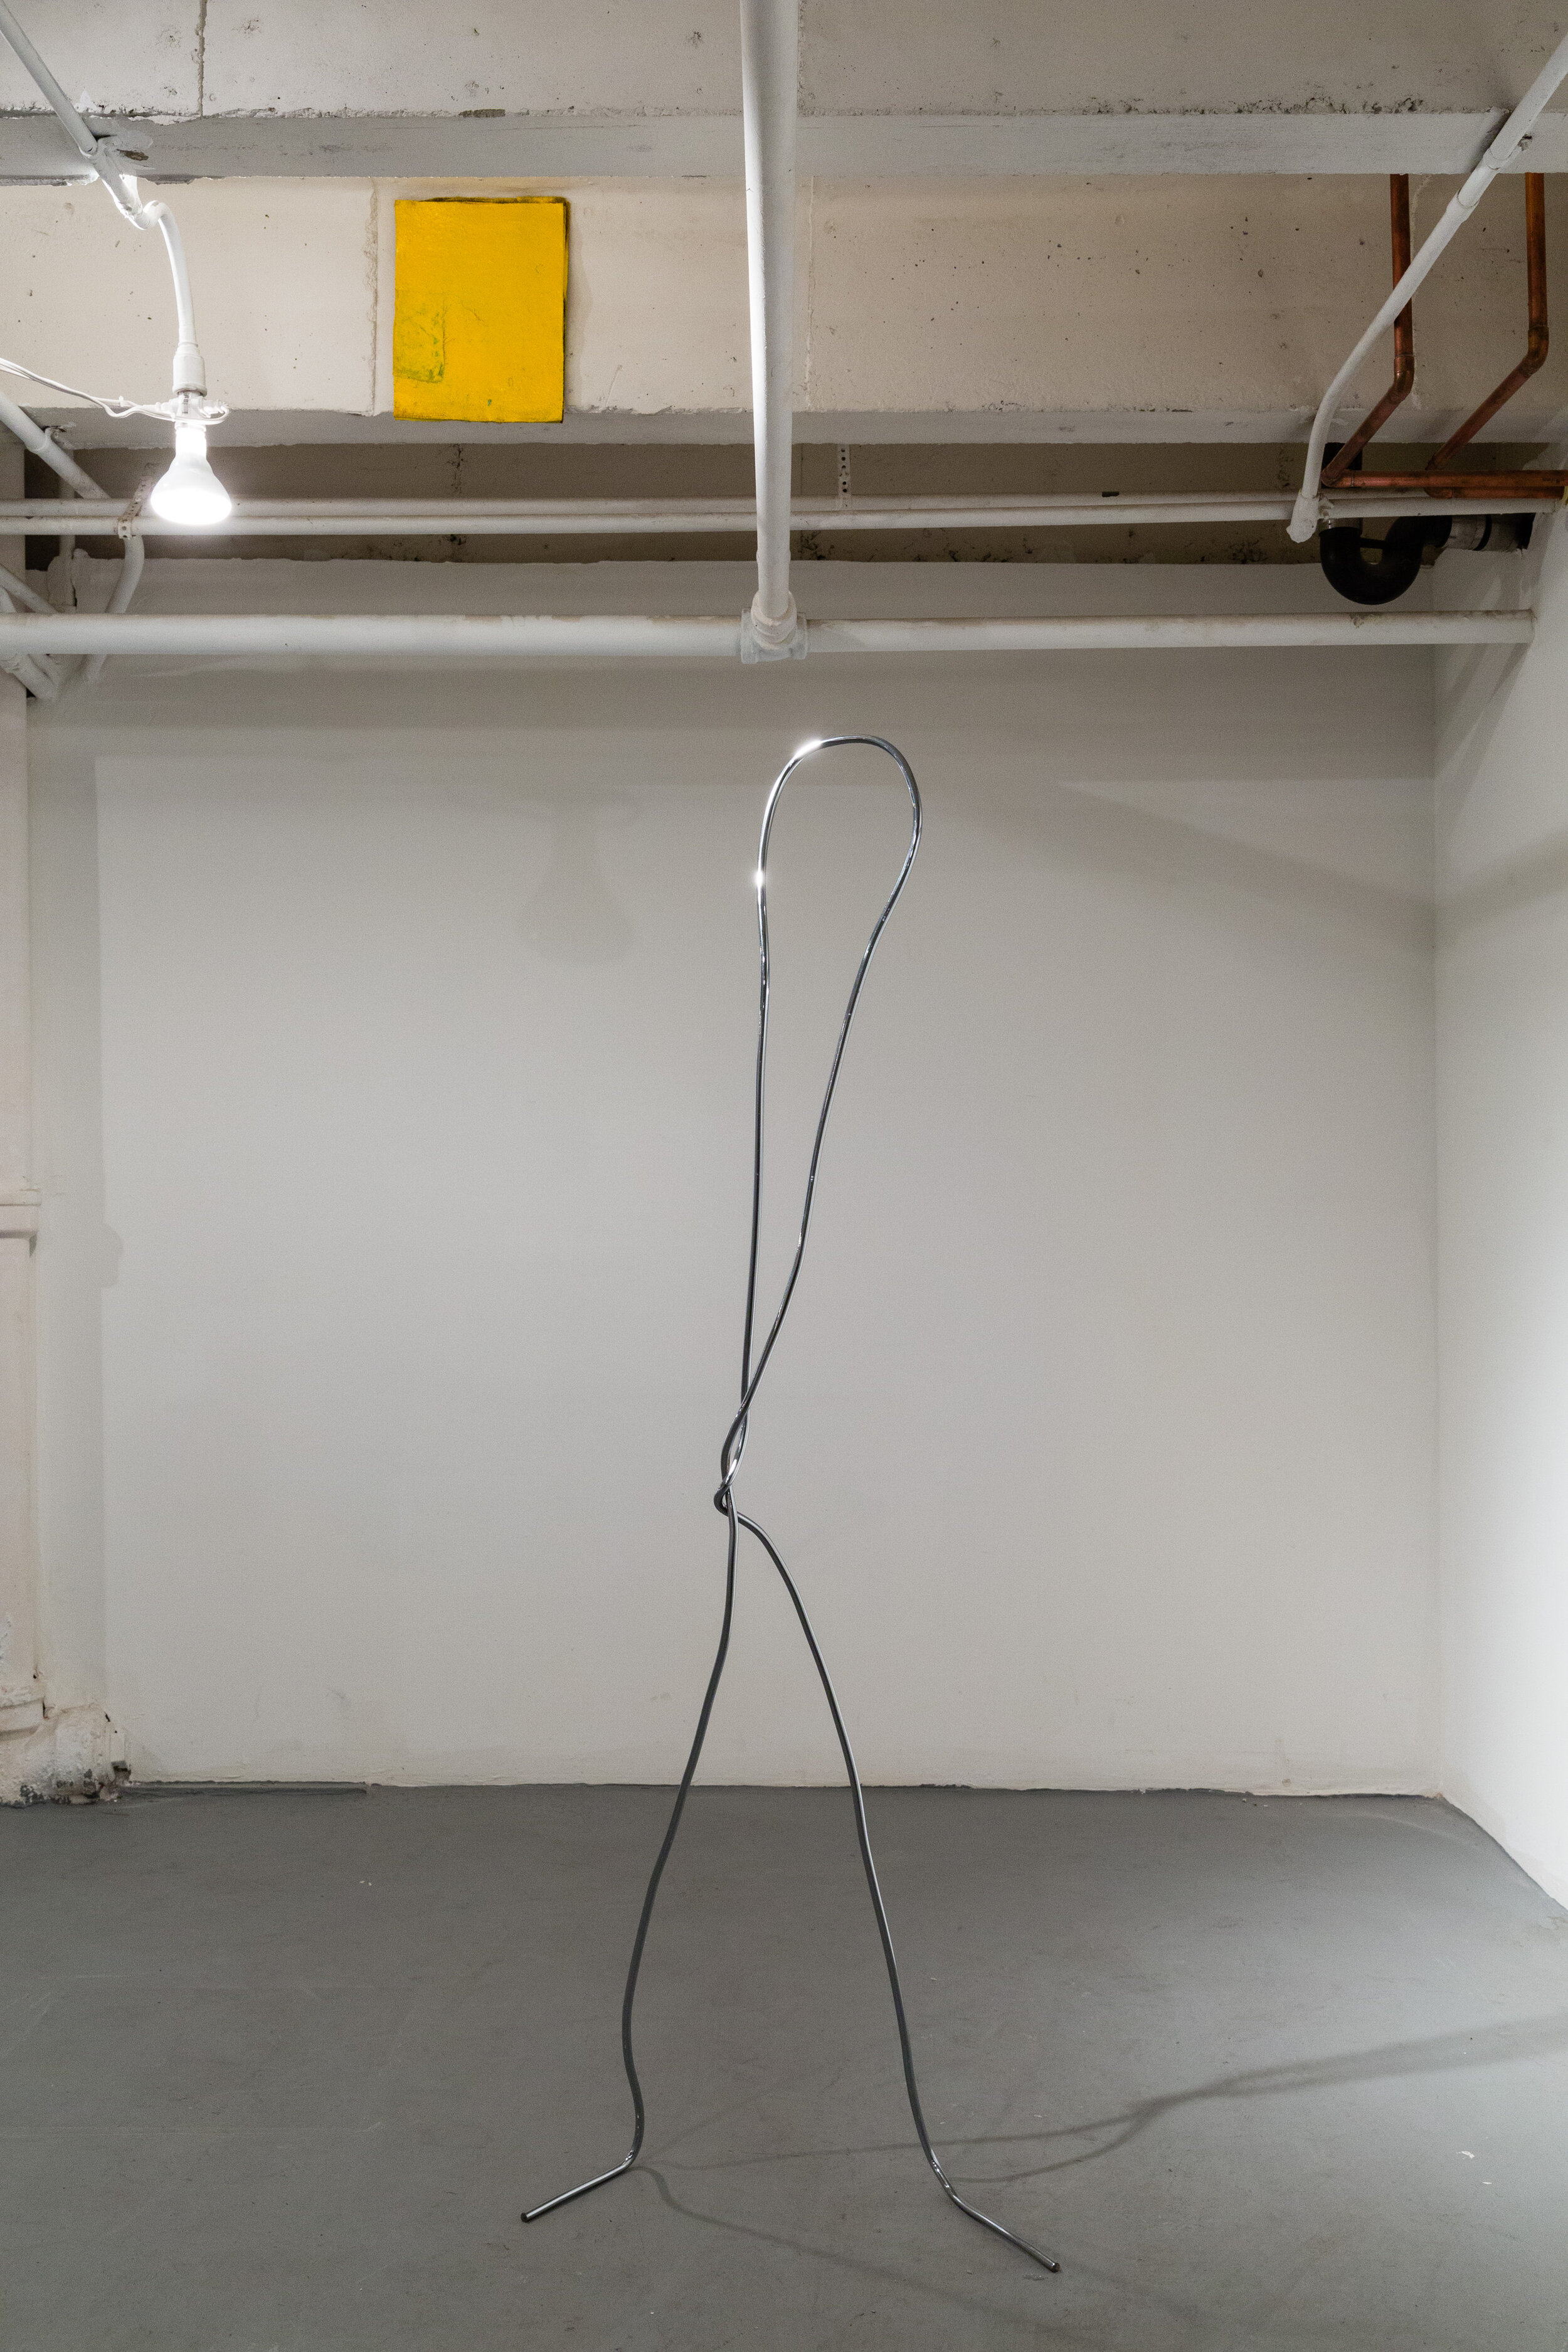   Push Me Pull You; The Horse With No Ass , Curated by Alice Clements, Installation at CJG, November 2014 